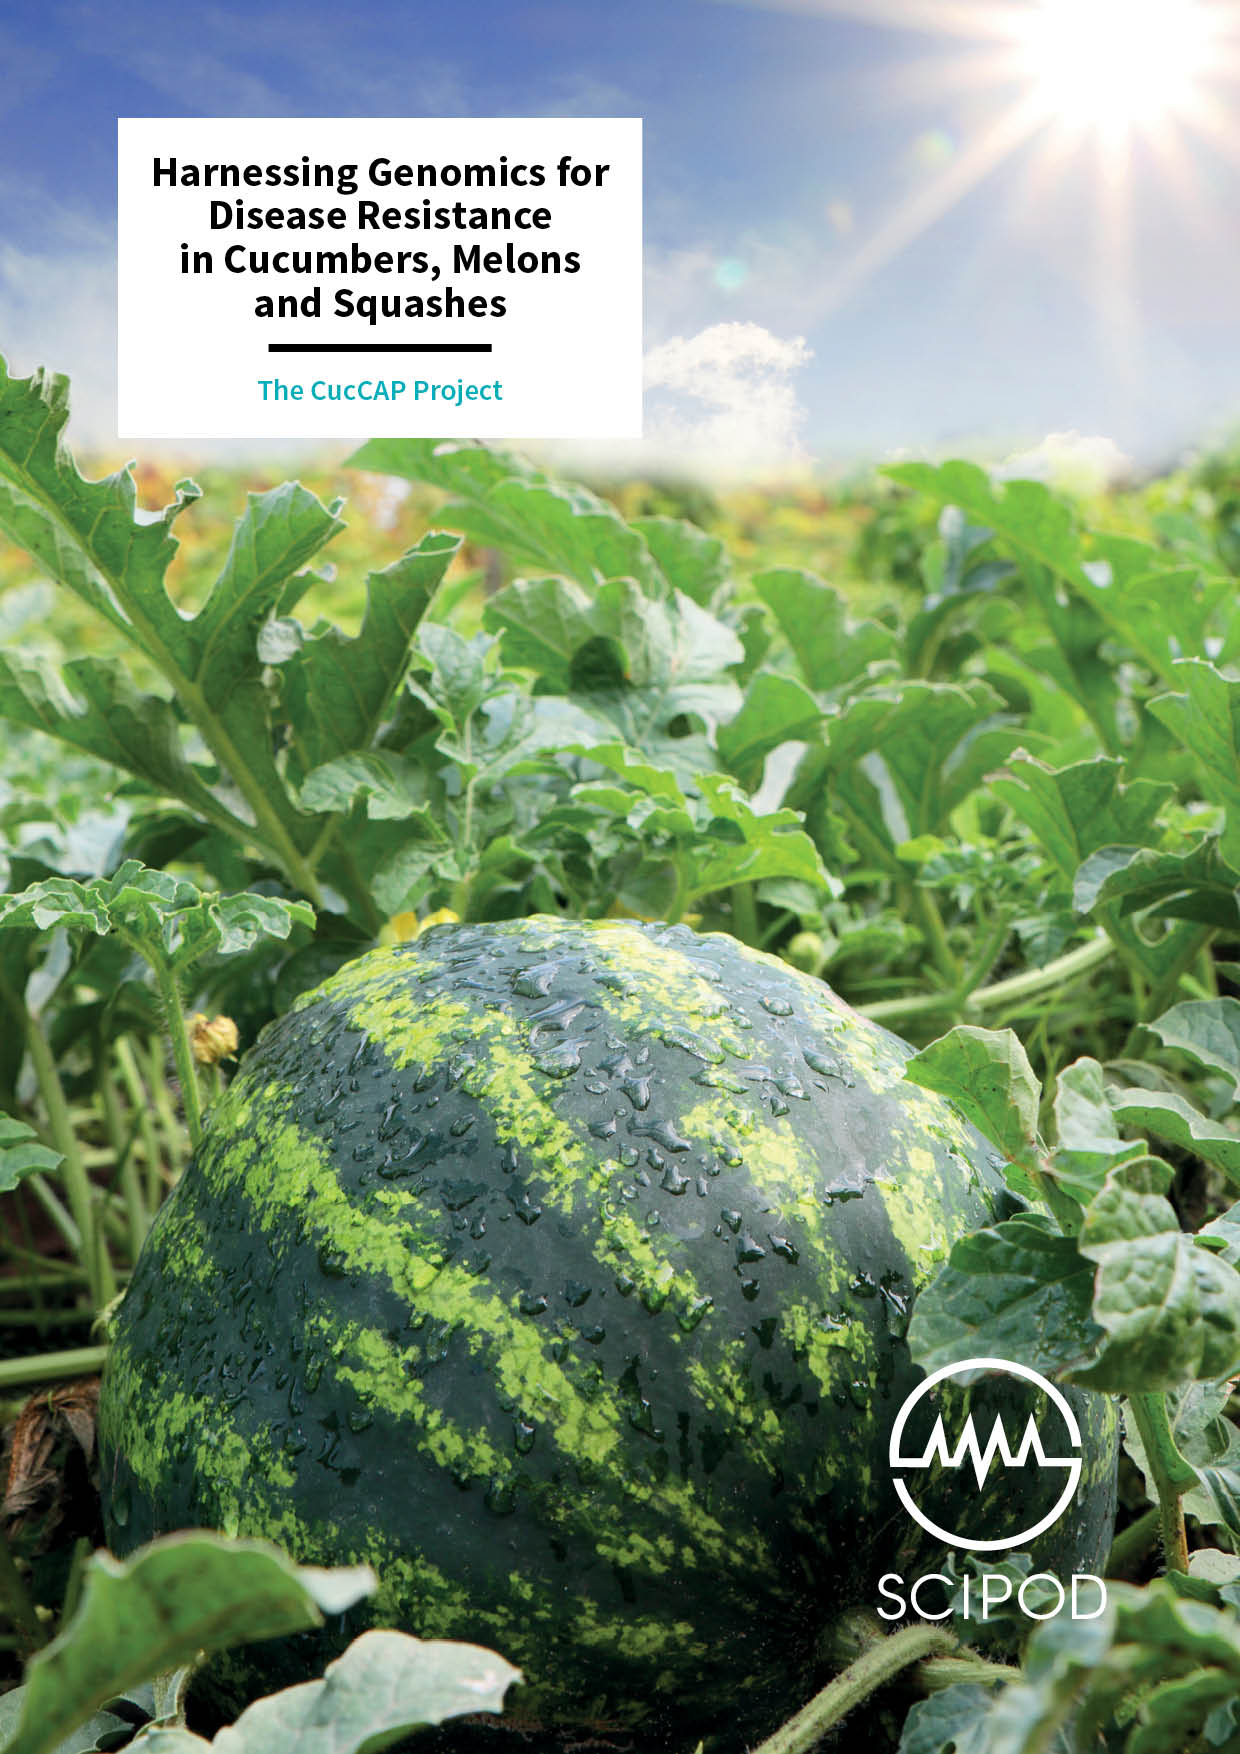 Harnessing Genomics for Disease Resistance in Cucumbers, Melons and Squashes – Dr Rebecca Grumet, Michigan State University